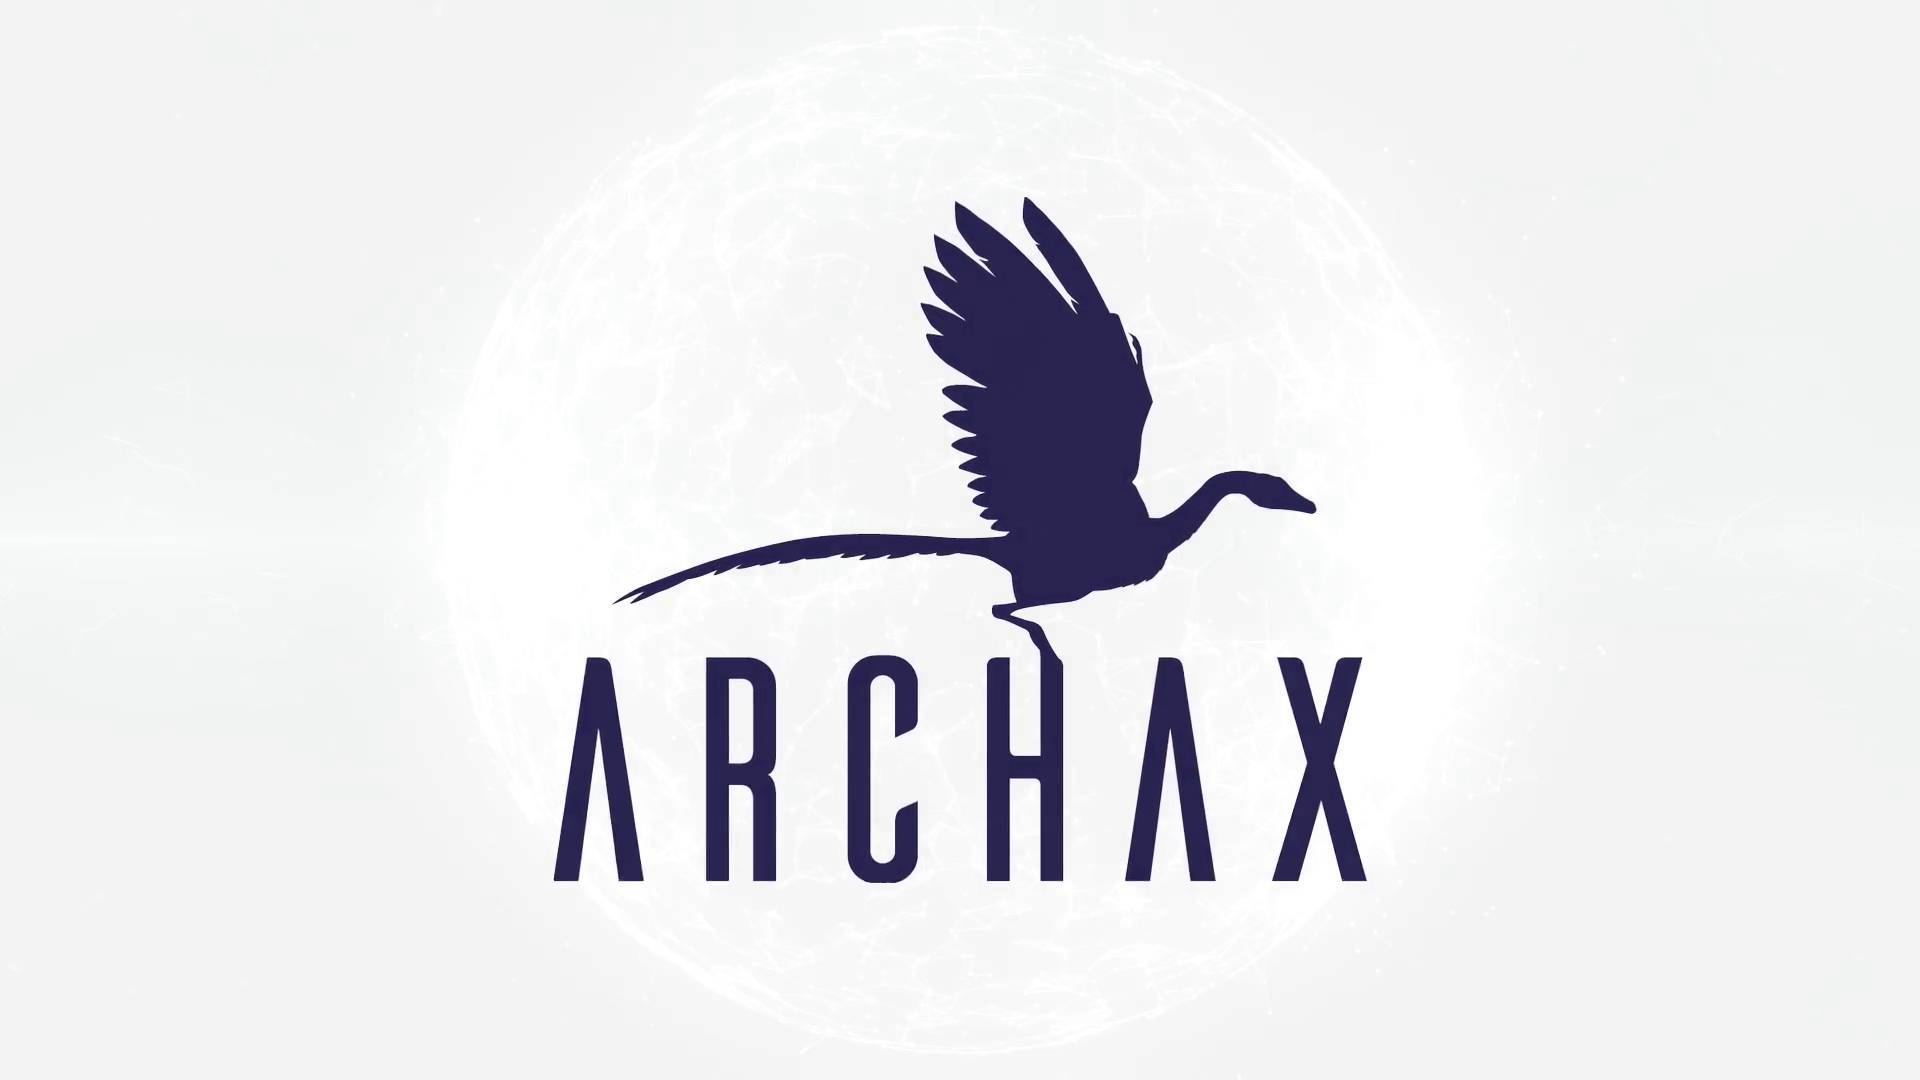 Archax Chooses ClearBank For Banking Services